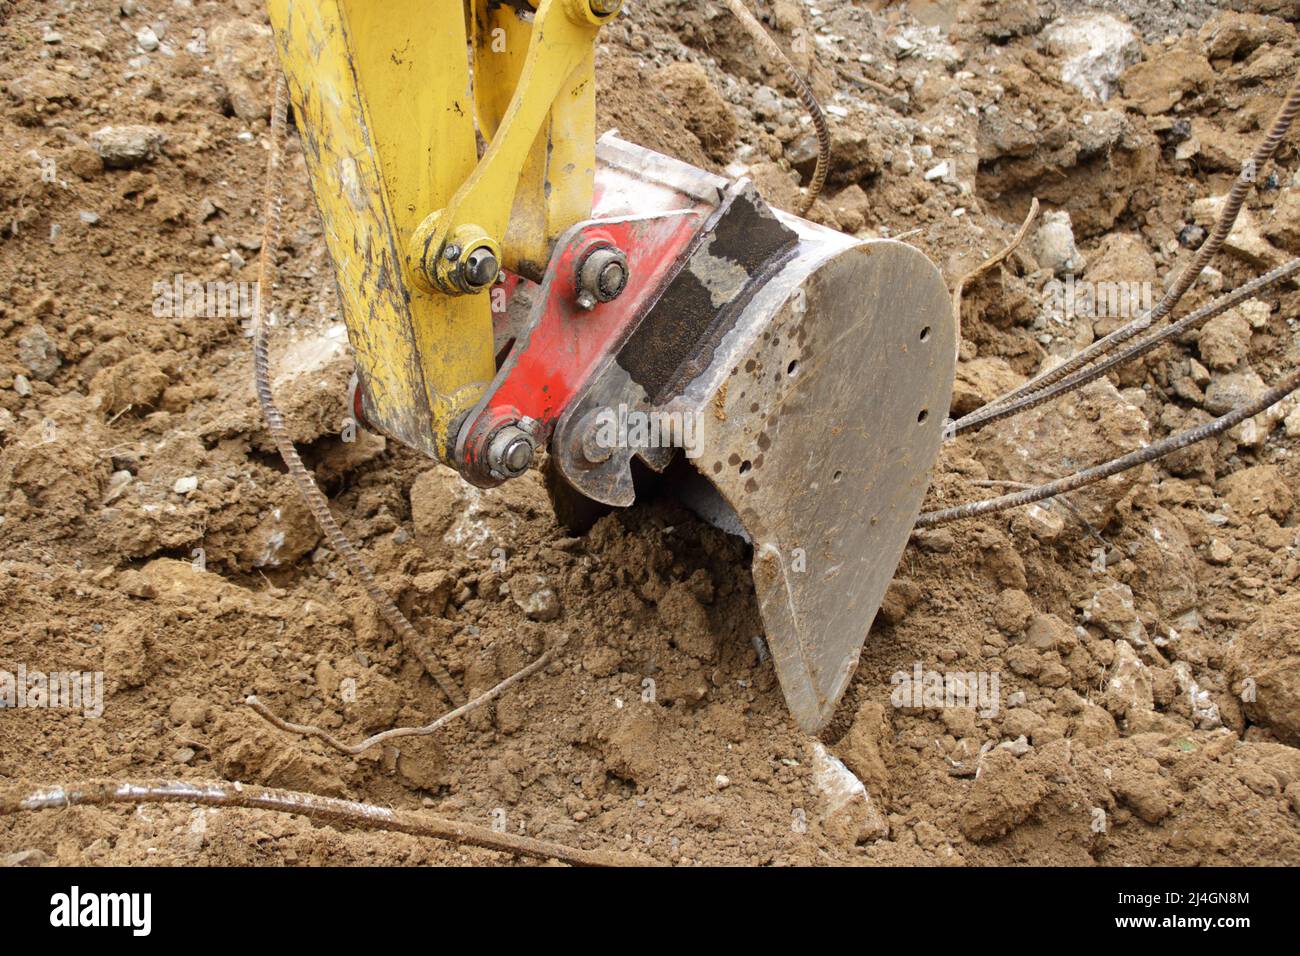 The gripper of an excavator digs into a clay soil Stock Photo